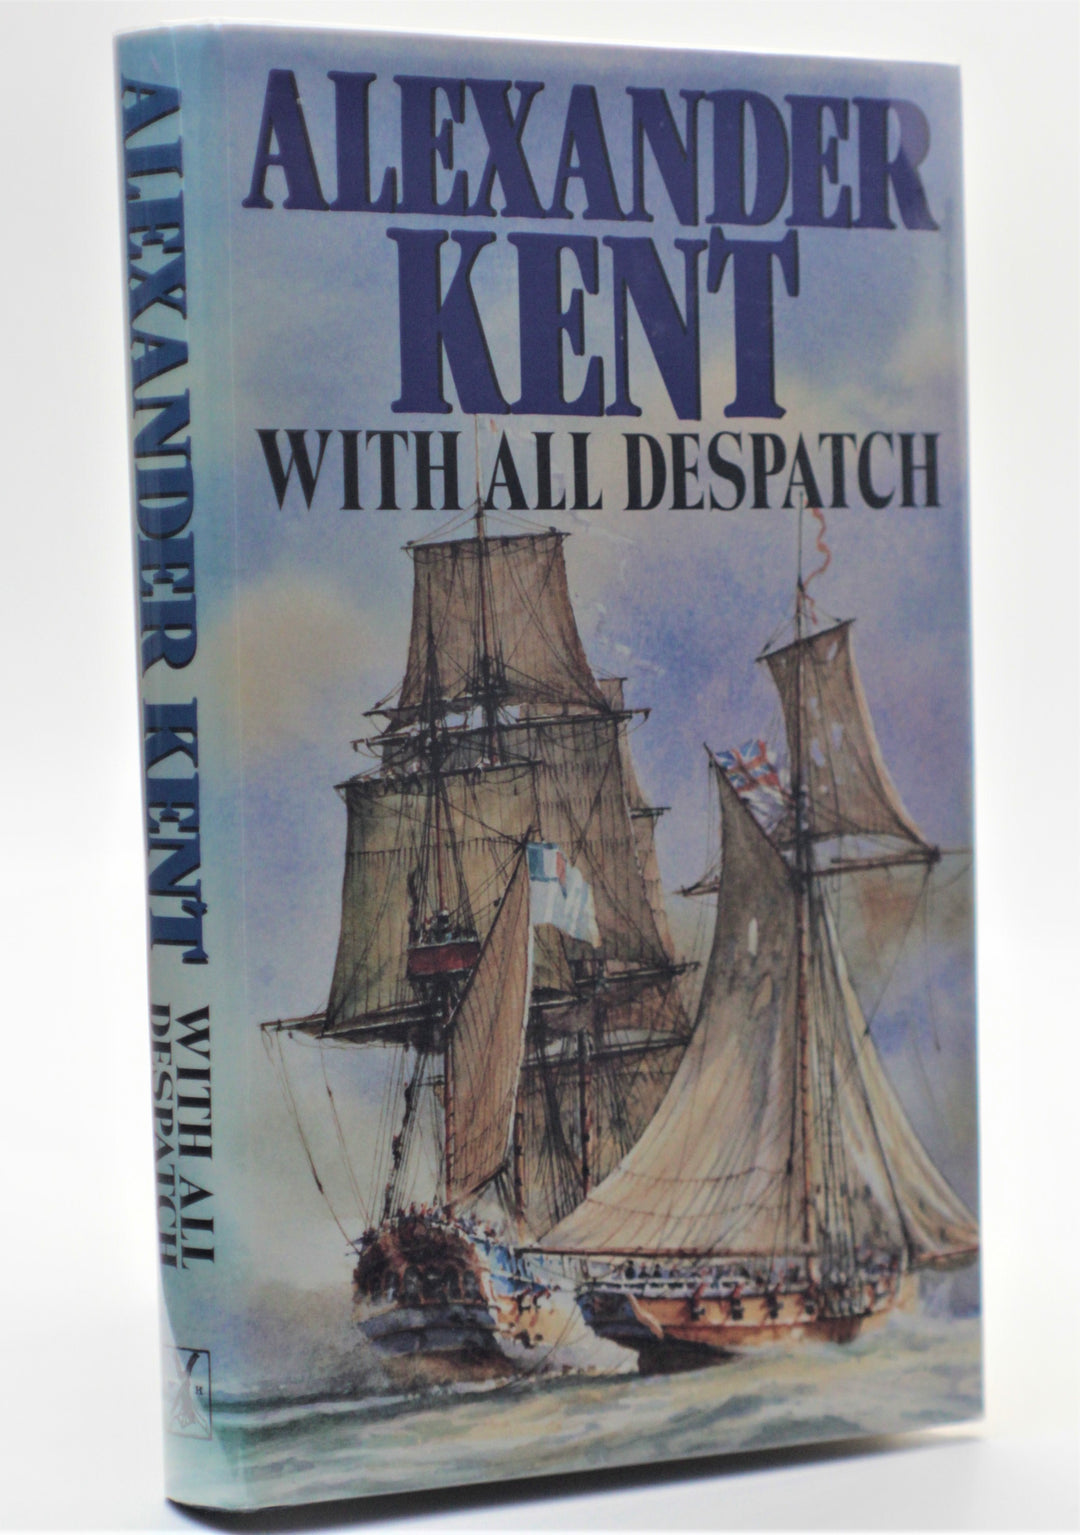 Kent, Alexander - With All Despatch | front cover